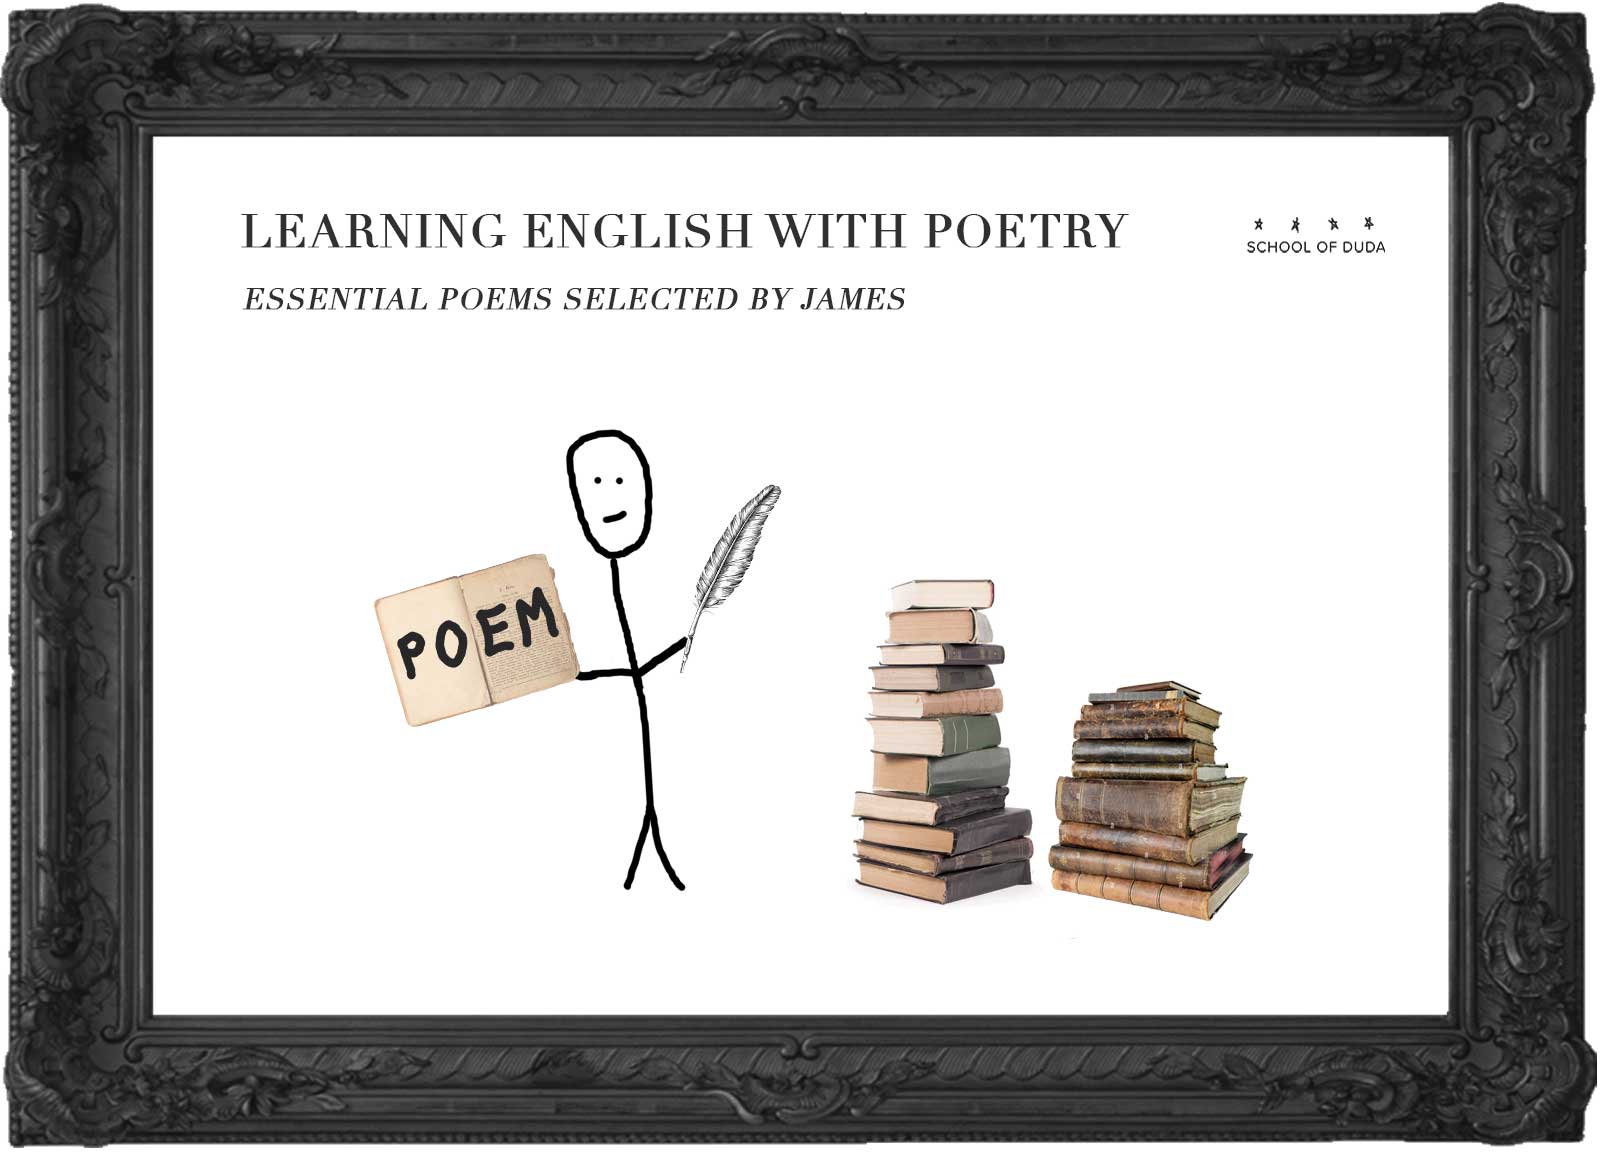 LEARNING ENGLISH WITH POETRY COURSE